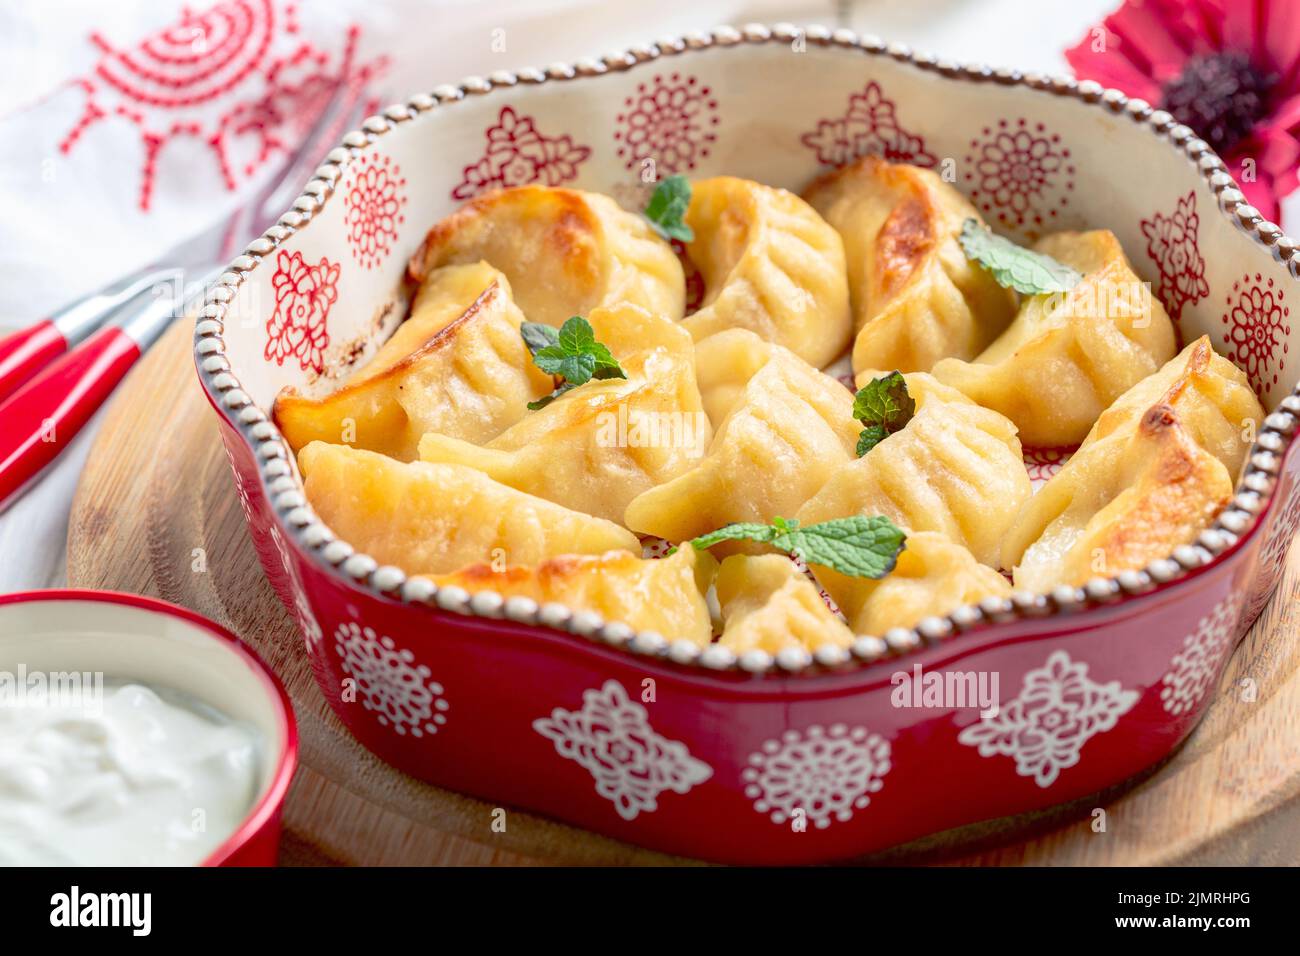 Baked dumplings with cottage cheese close up. Stock Photo